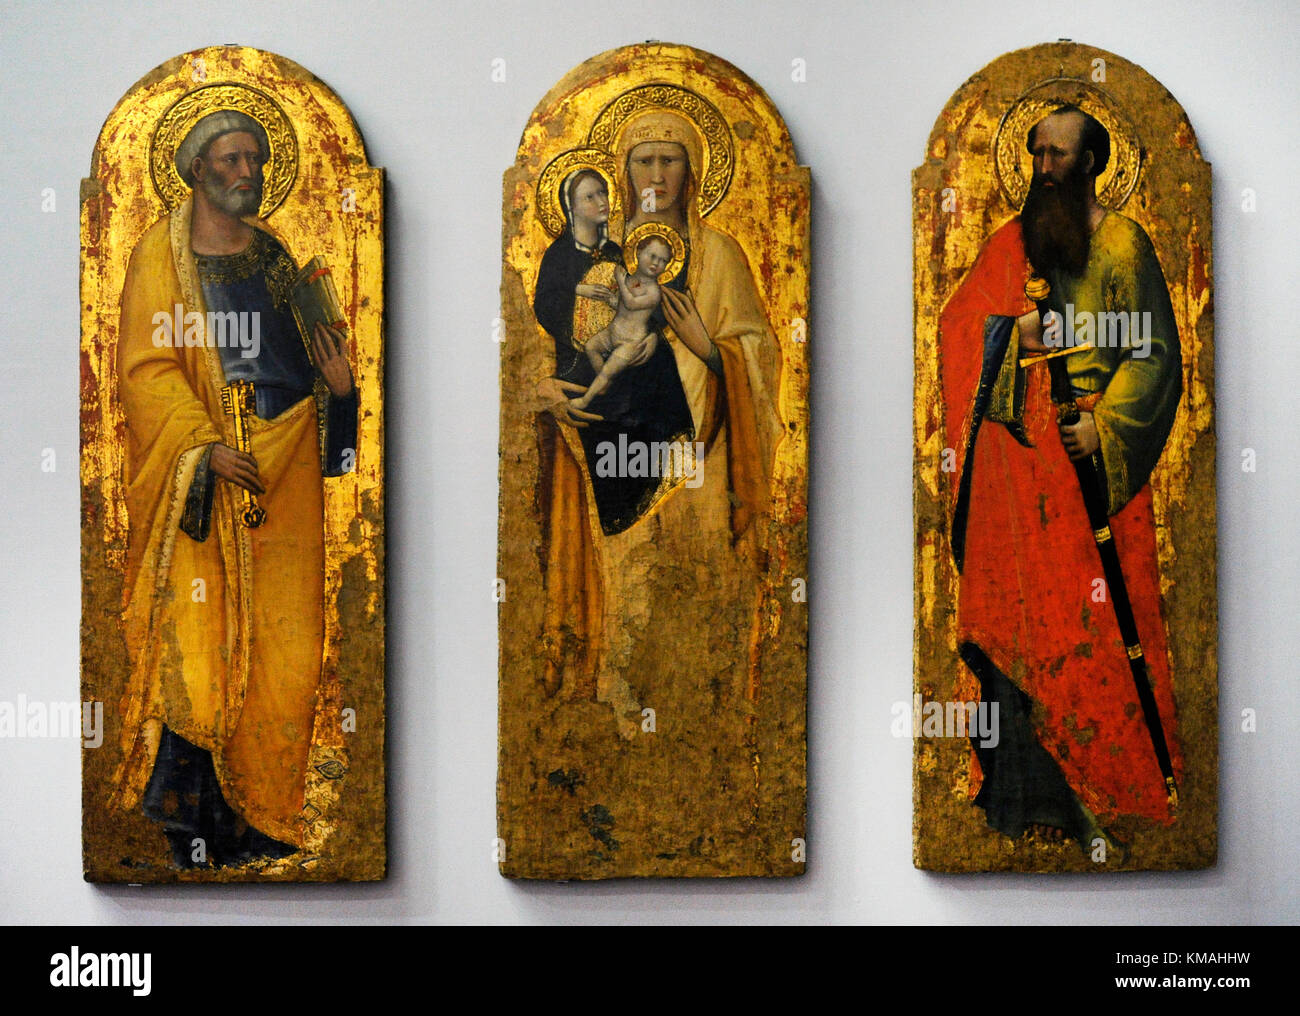 Master of the History of Saint Ladislaus (late 14th century-early 15th century). Italian painter. Saint Anne (Saint Anne Metterza) and Saint Peter and Saint Paul. Fragment of polyptych. Tempera and gold on table. Bourbon Collection. National Museum of Capodimonte. Naples. Italy. Stock Photo